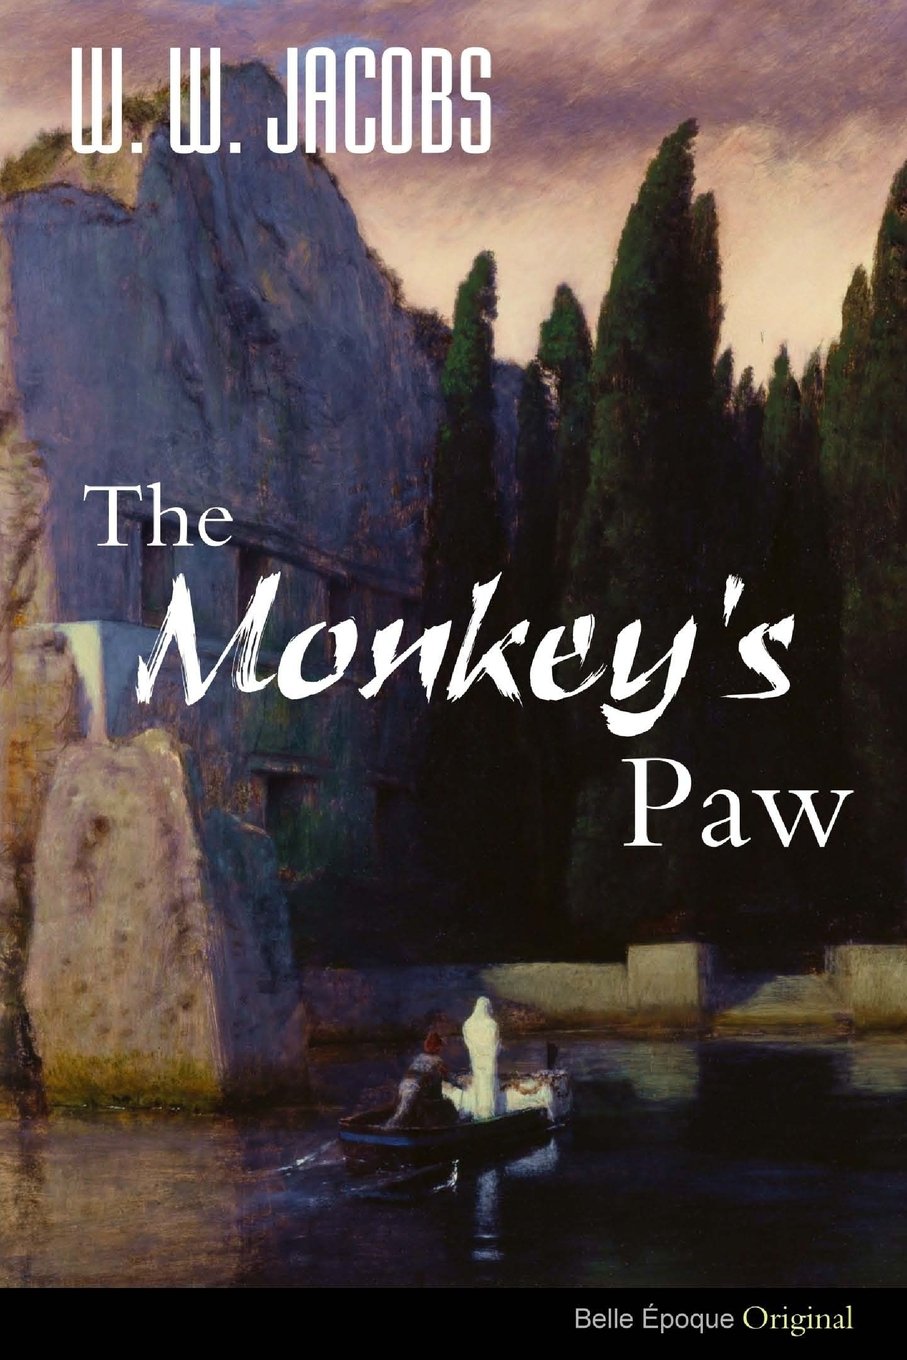 Book cover of The Monkey's Paw.